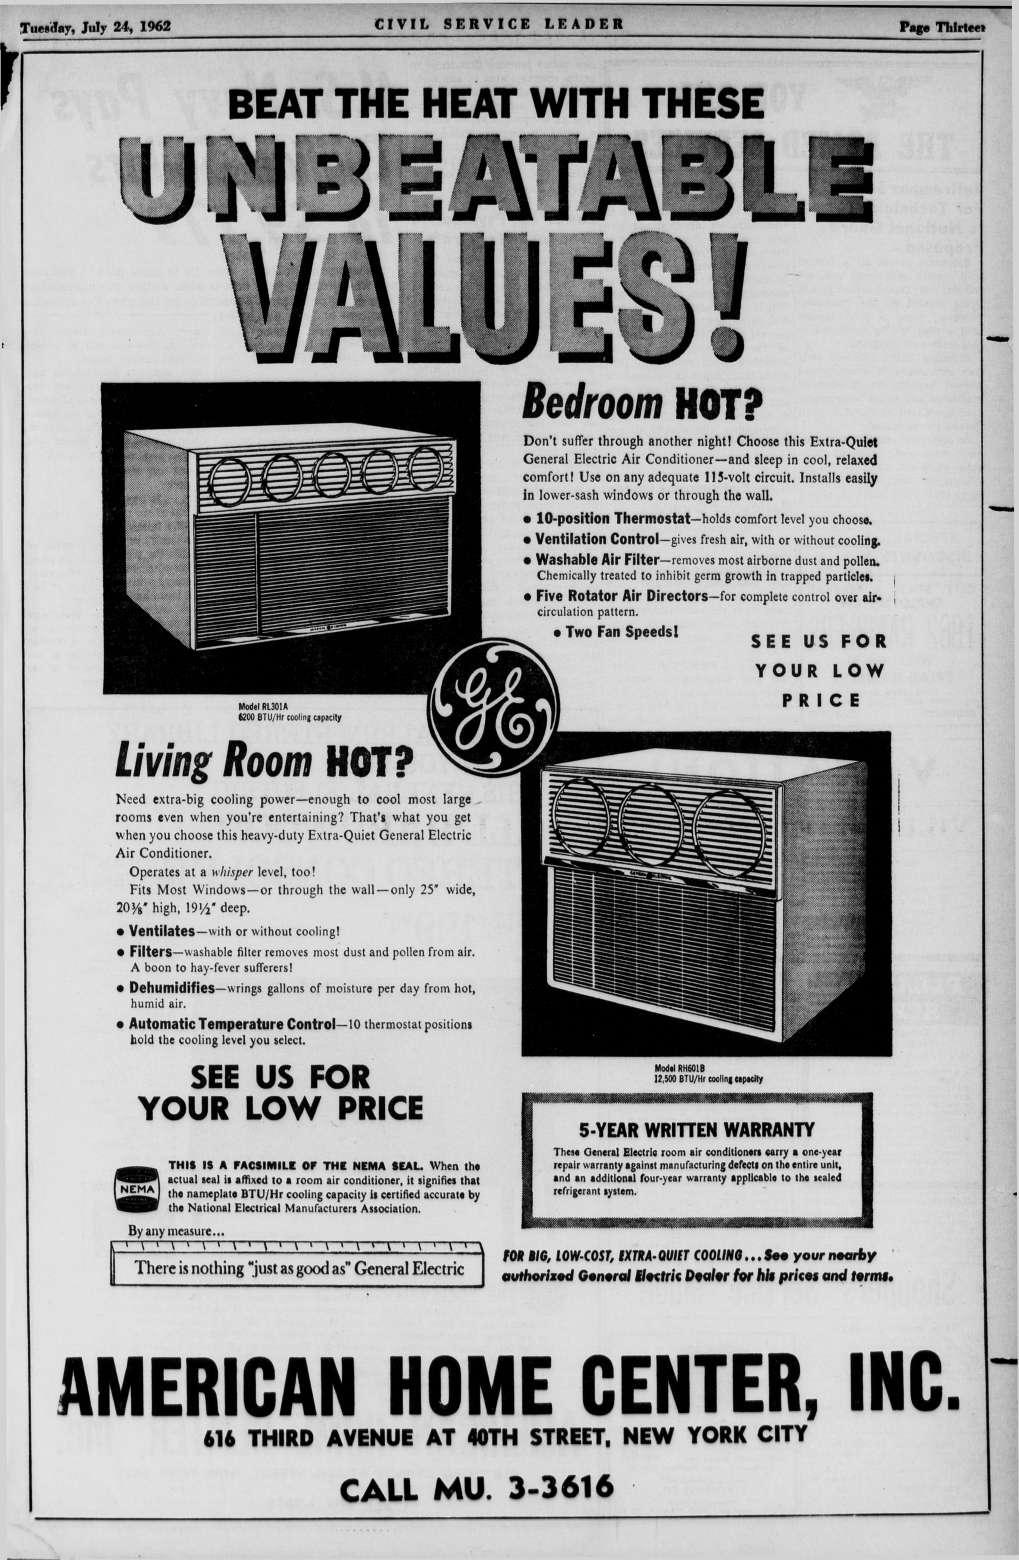 r Tues(Jay, July 24, 1962 CIVIL SERVICE LEADER Page ThHcet BEAT THE HEAT WITH THESE Bedroom HOT? Don't suffer through another nght!